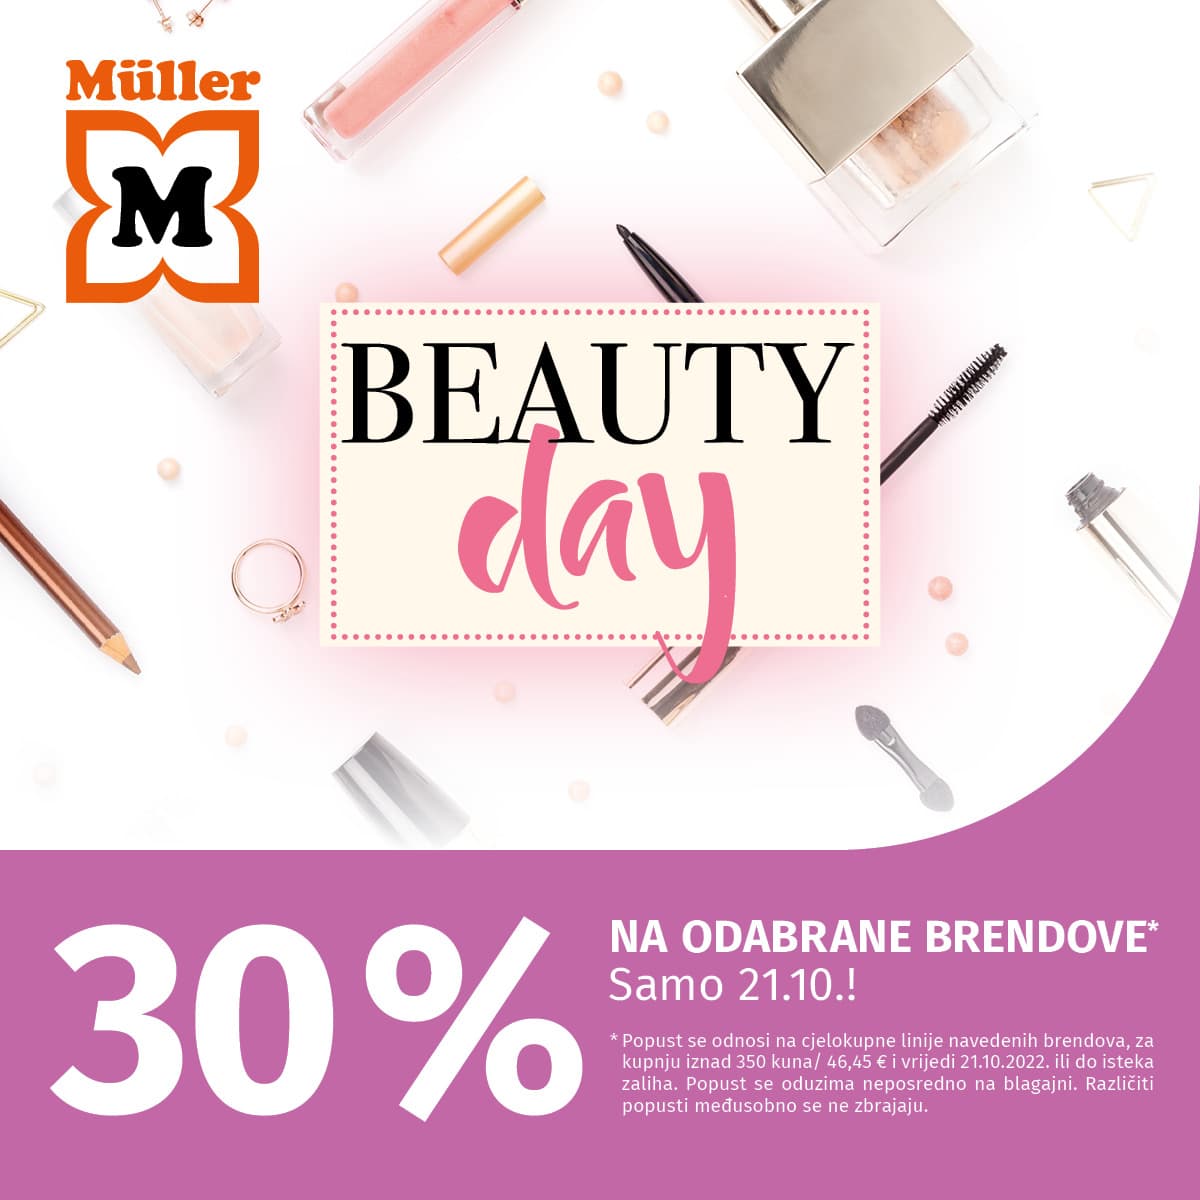 Müller – Beauty day